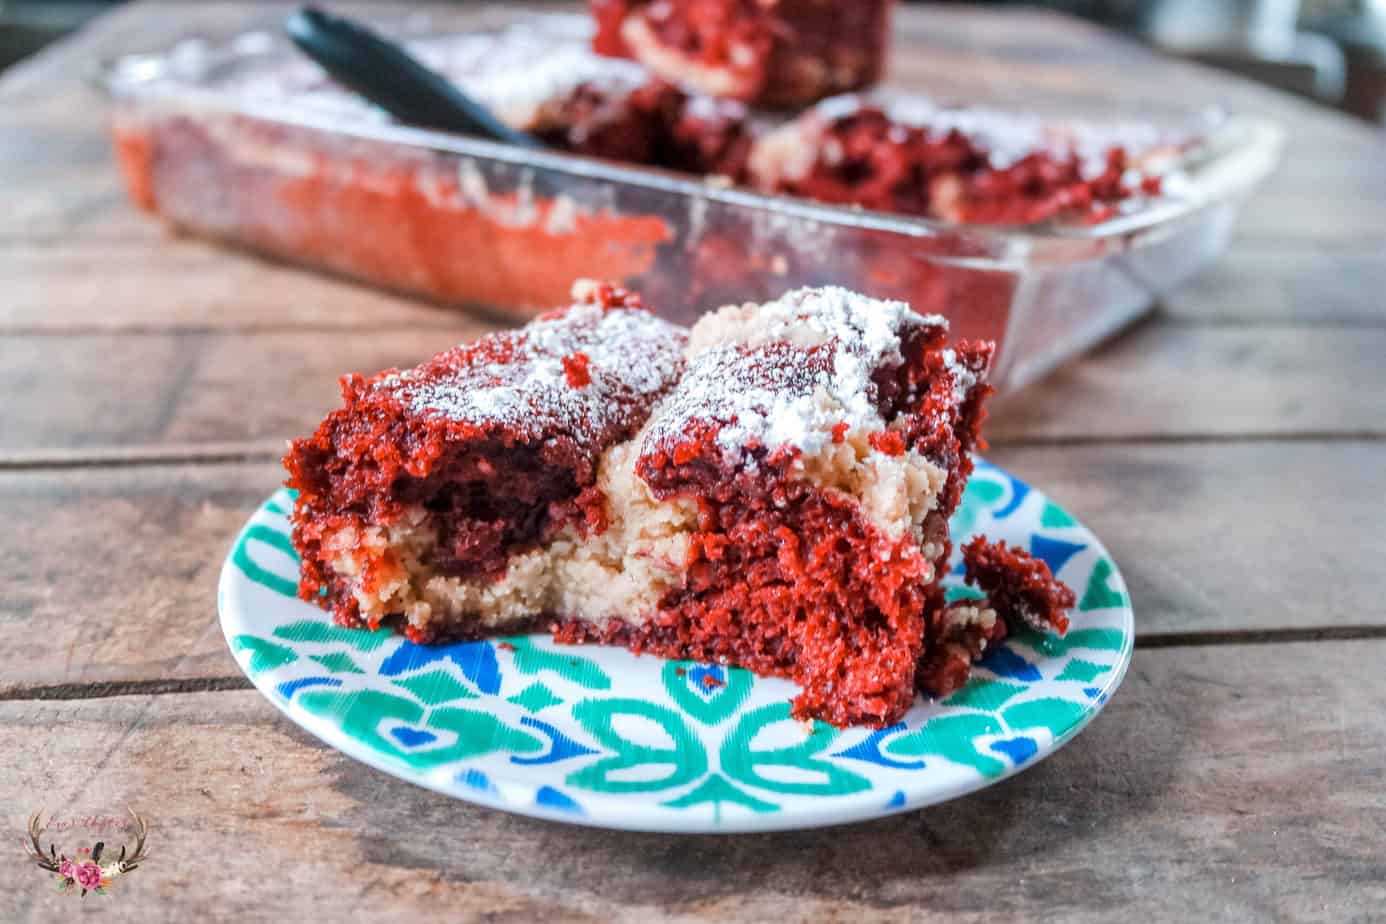 Easy Red Velvet Crumb Cake recipe from a Cake Mix